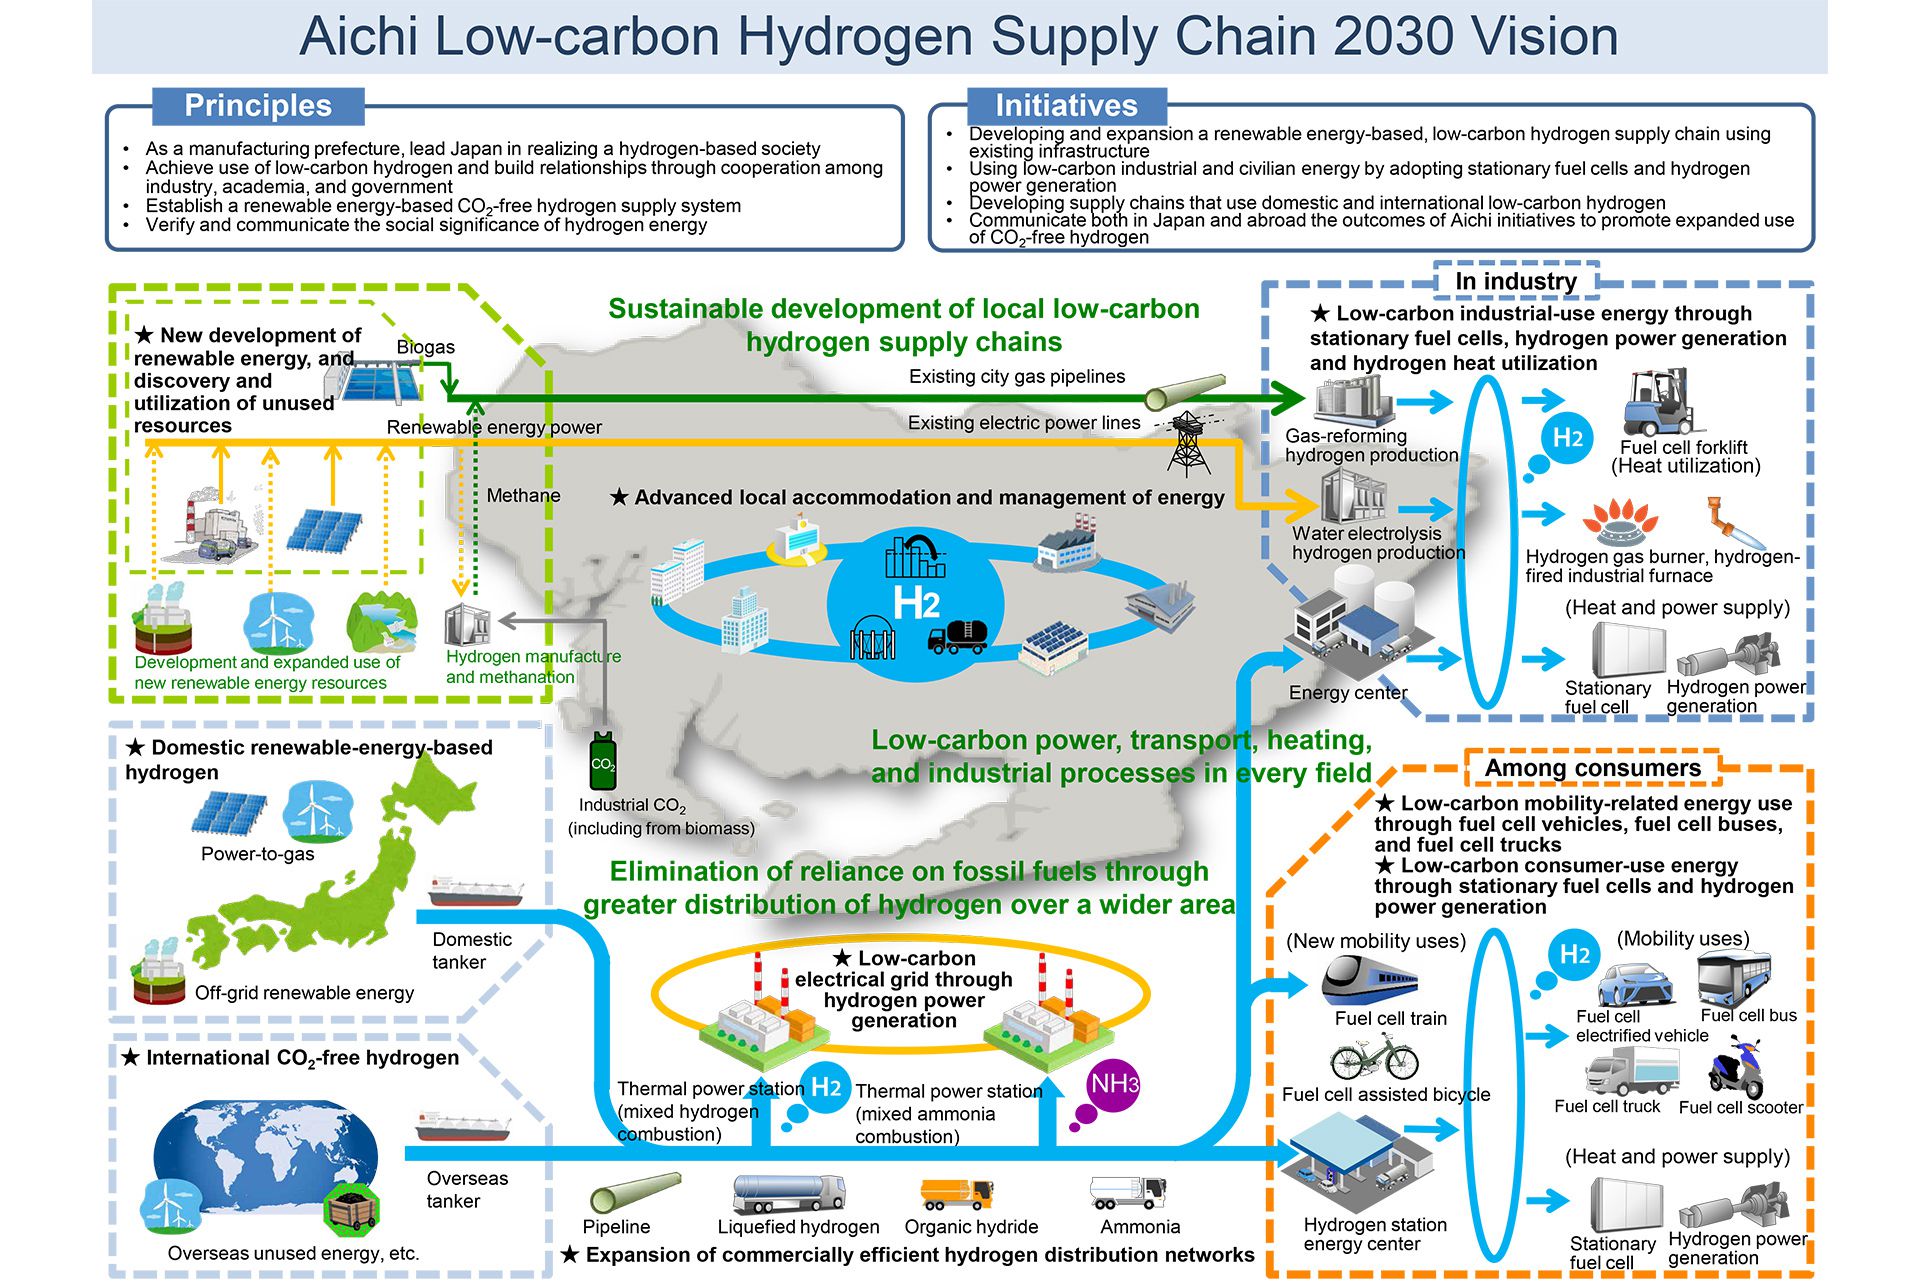 Aichi Low-carbon Hydrogen Supply Chain 2030 Vision